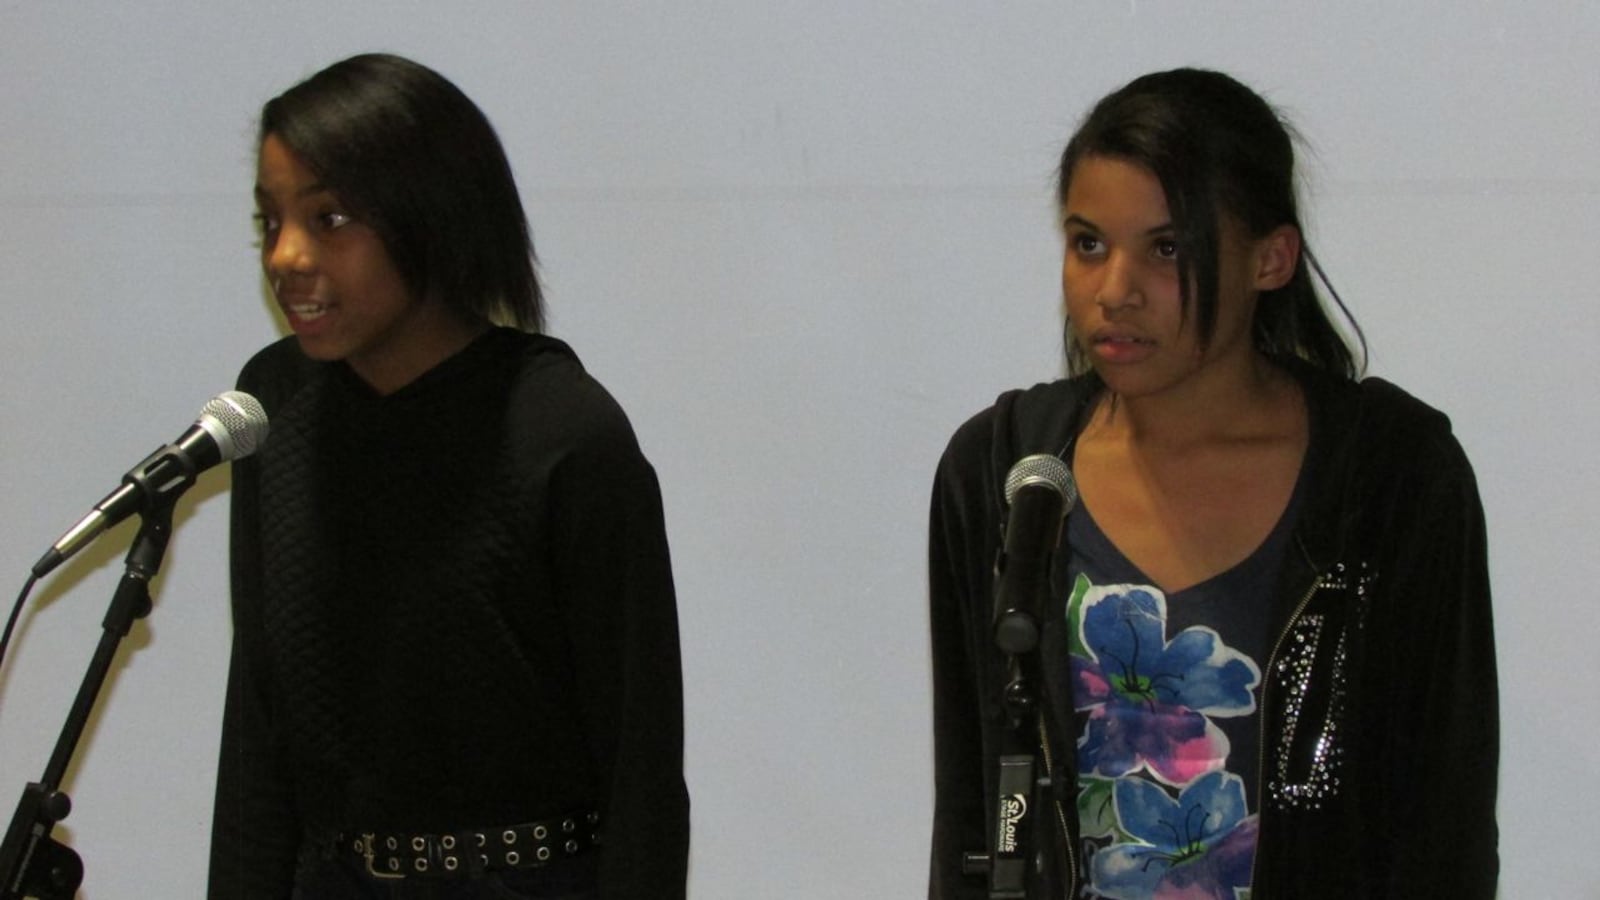 Madyson Jones (left) and Madison Ivory of Lawrence Township's Belzer Middle School present a co-written poem at an Indy Pulse competition last week at Donnan Middle School. Ivory, who uses just her last name when she performs, took first place for a different poem in the contest.